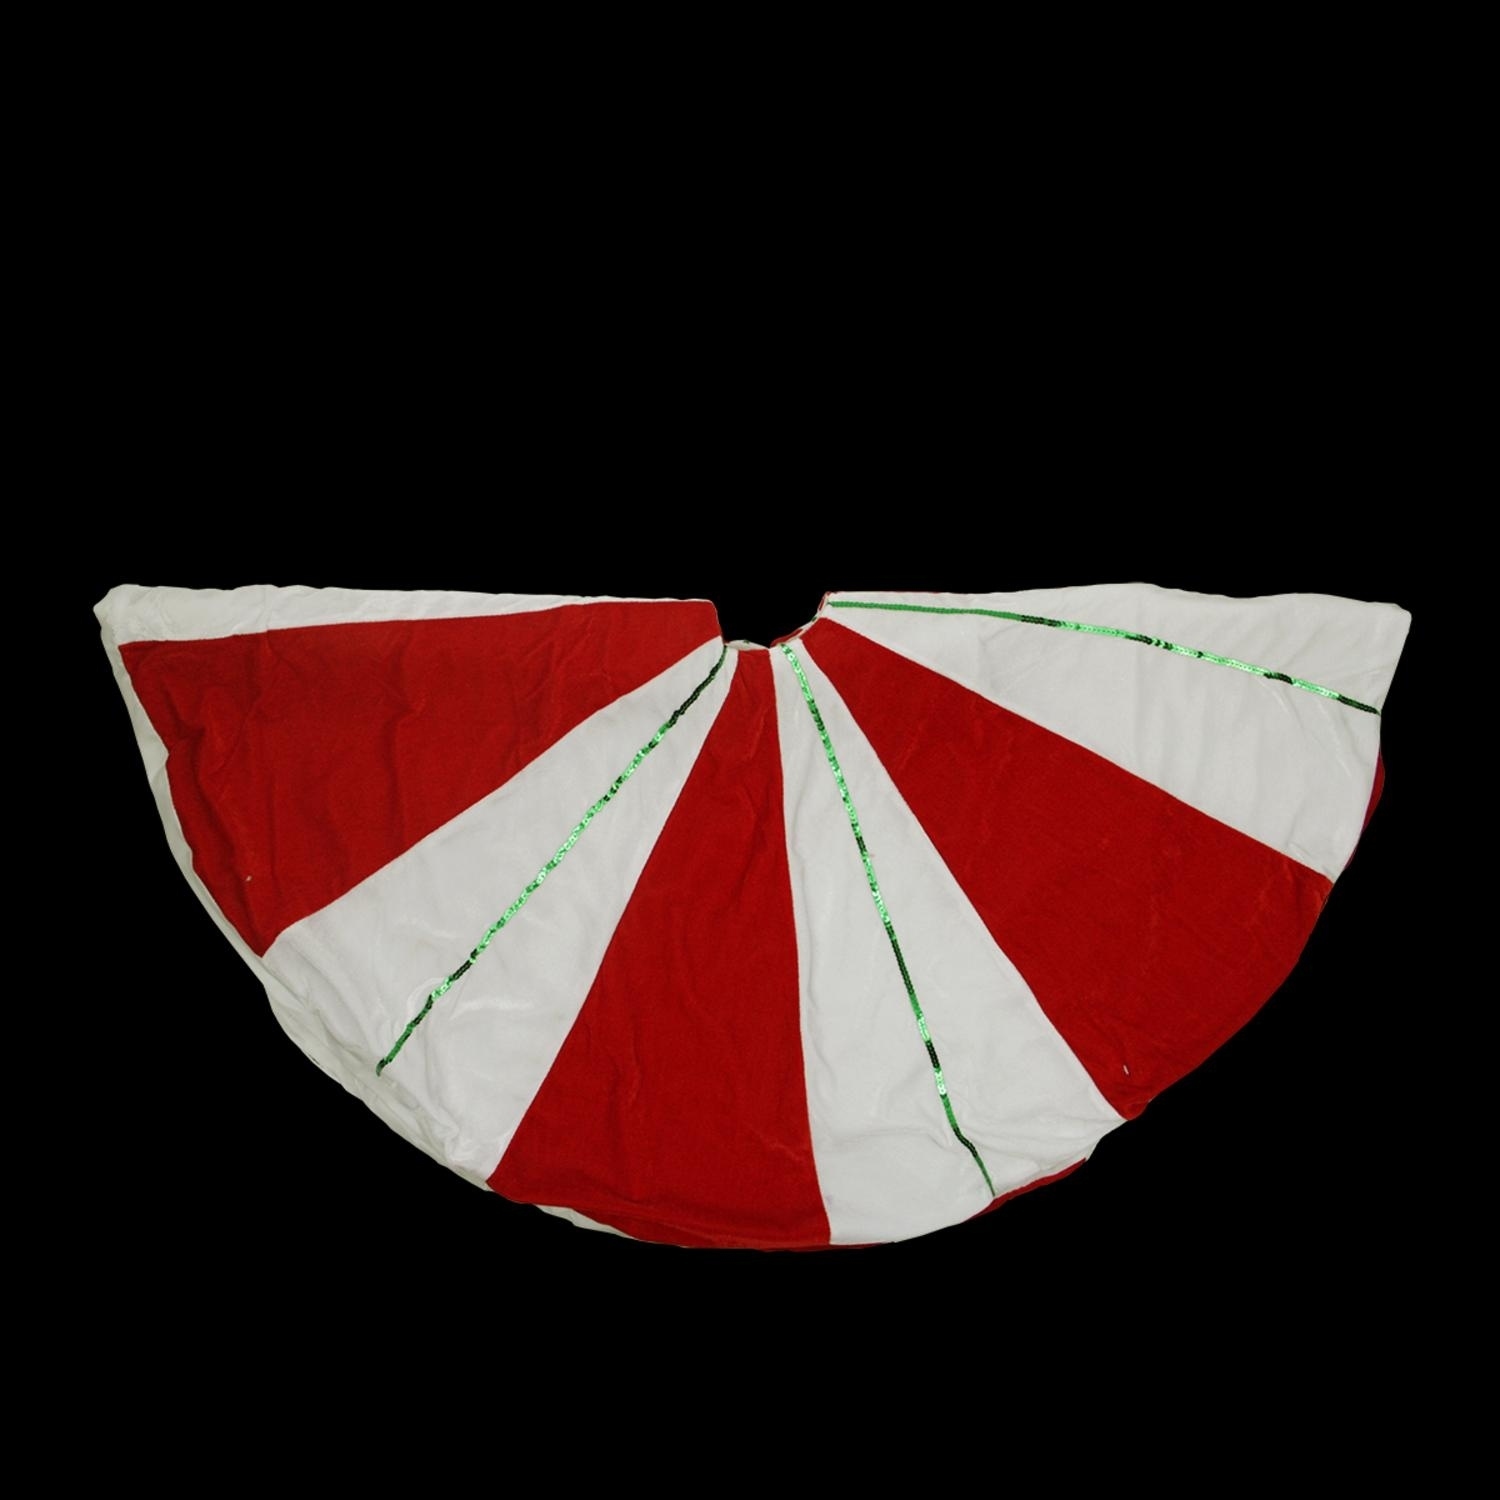 Northlight 48 in. Peppermint Twist Christmas Tree Skirt - image 2 of 2